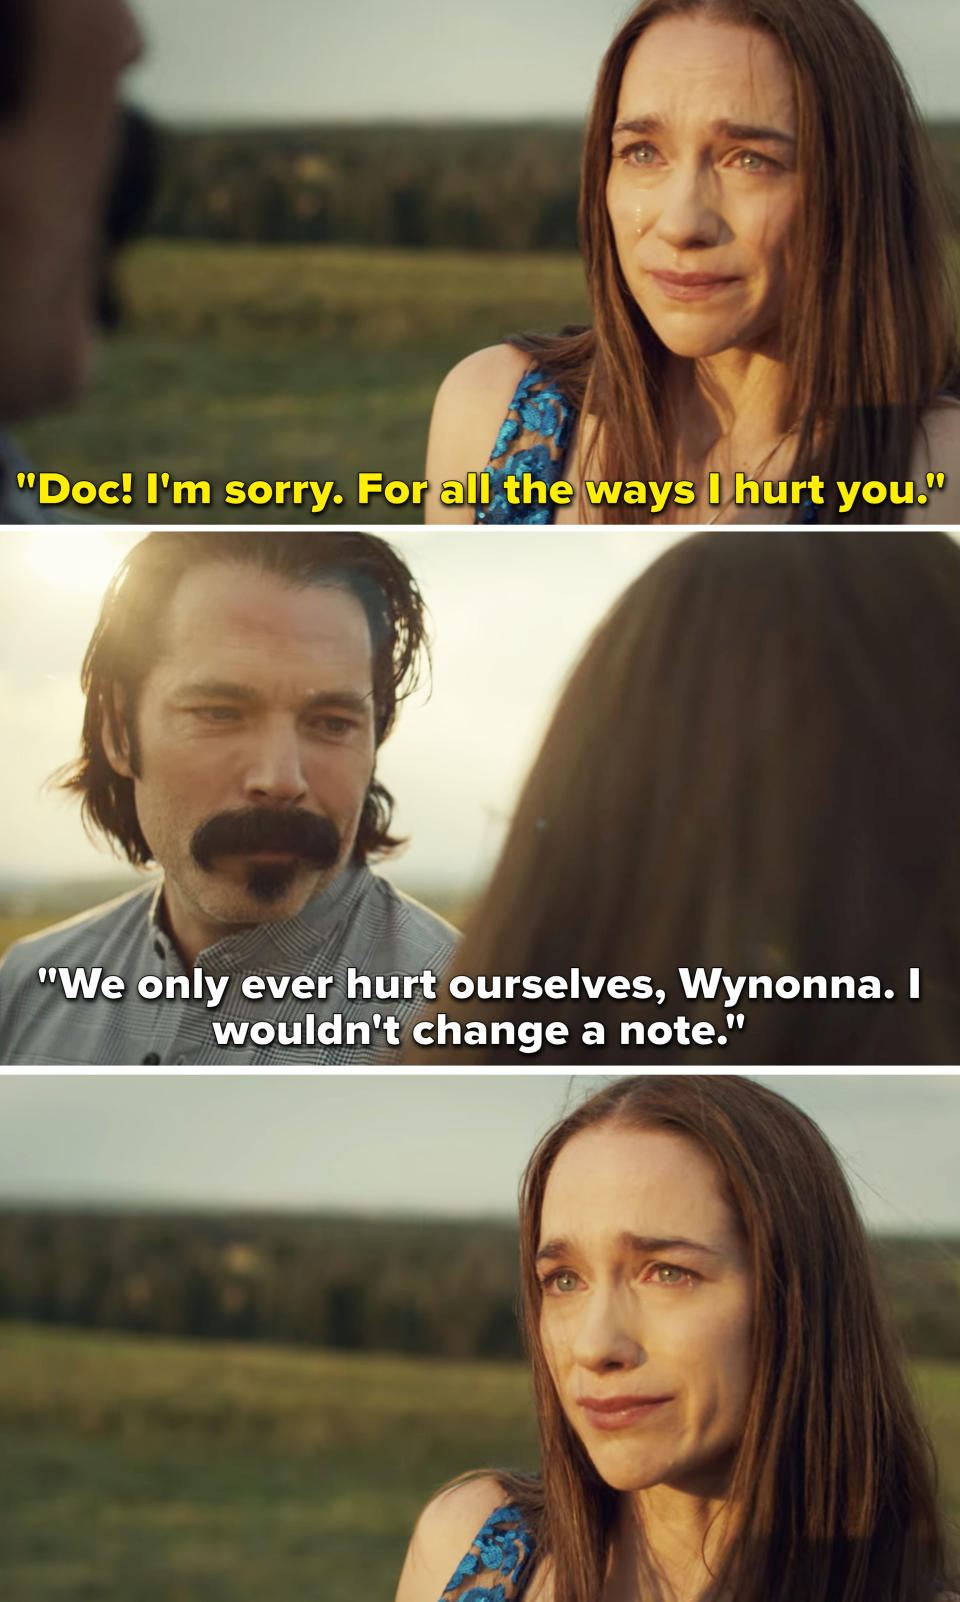 Wynonna telling Doc she's sorry, and Doc saying "I wouldn't change a note"